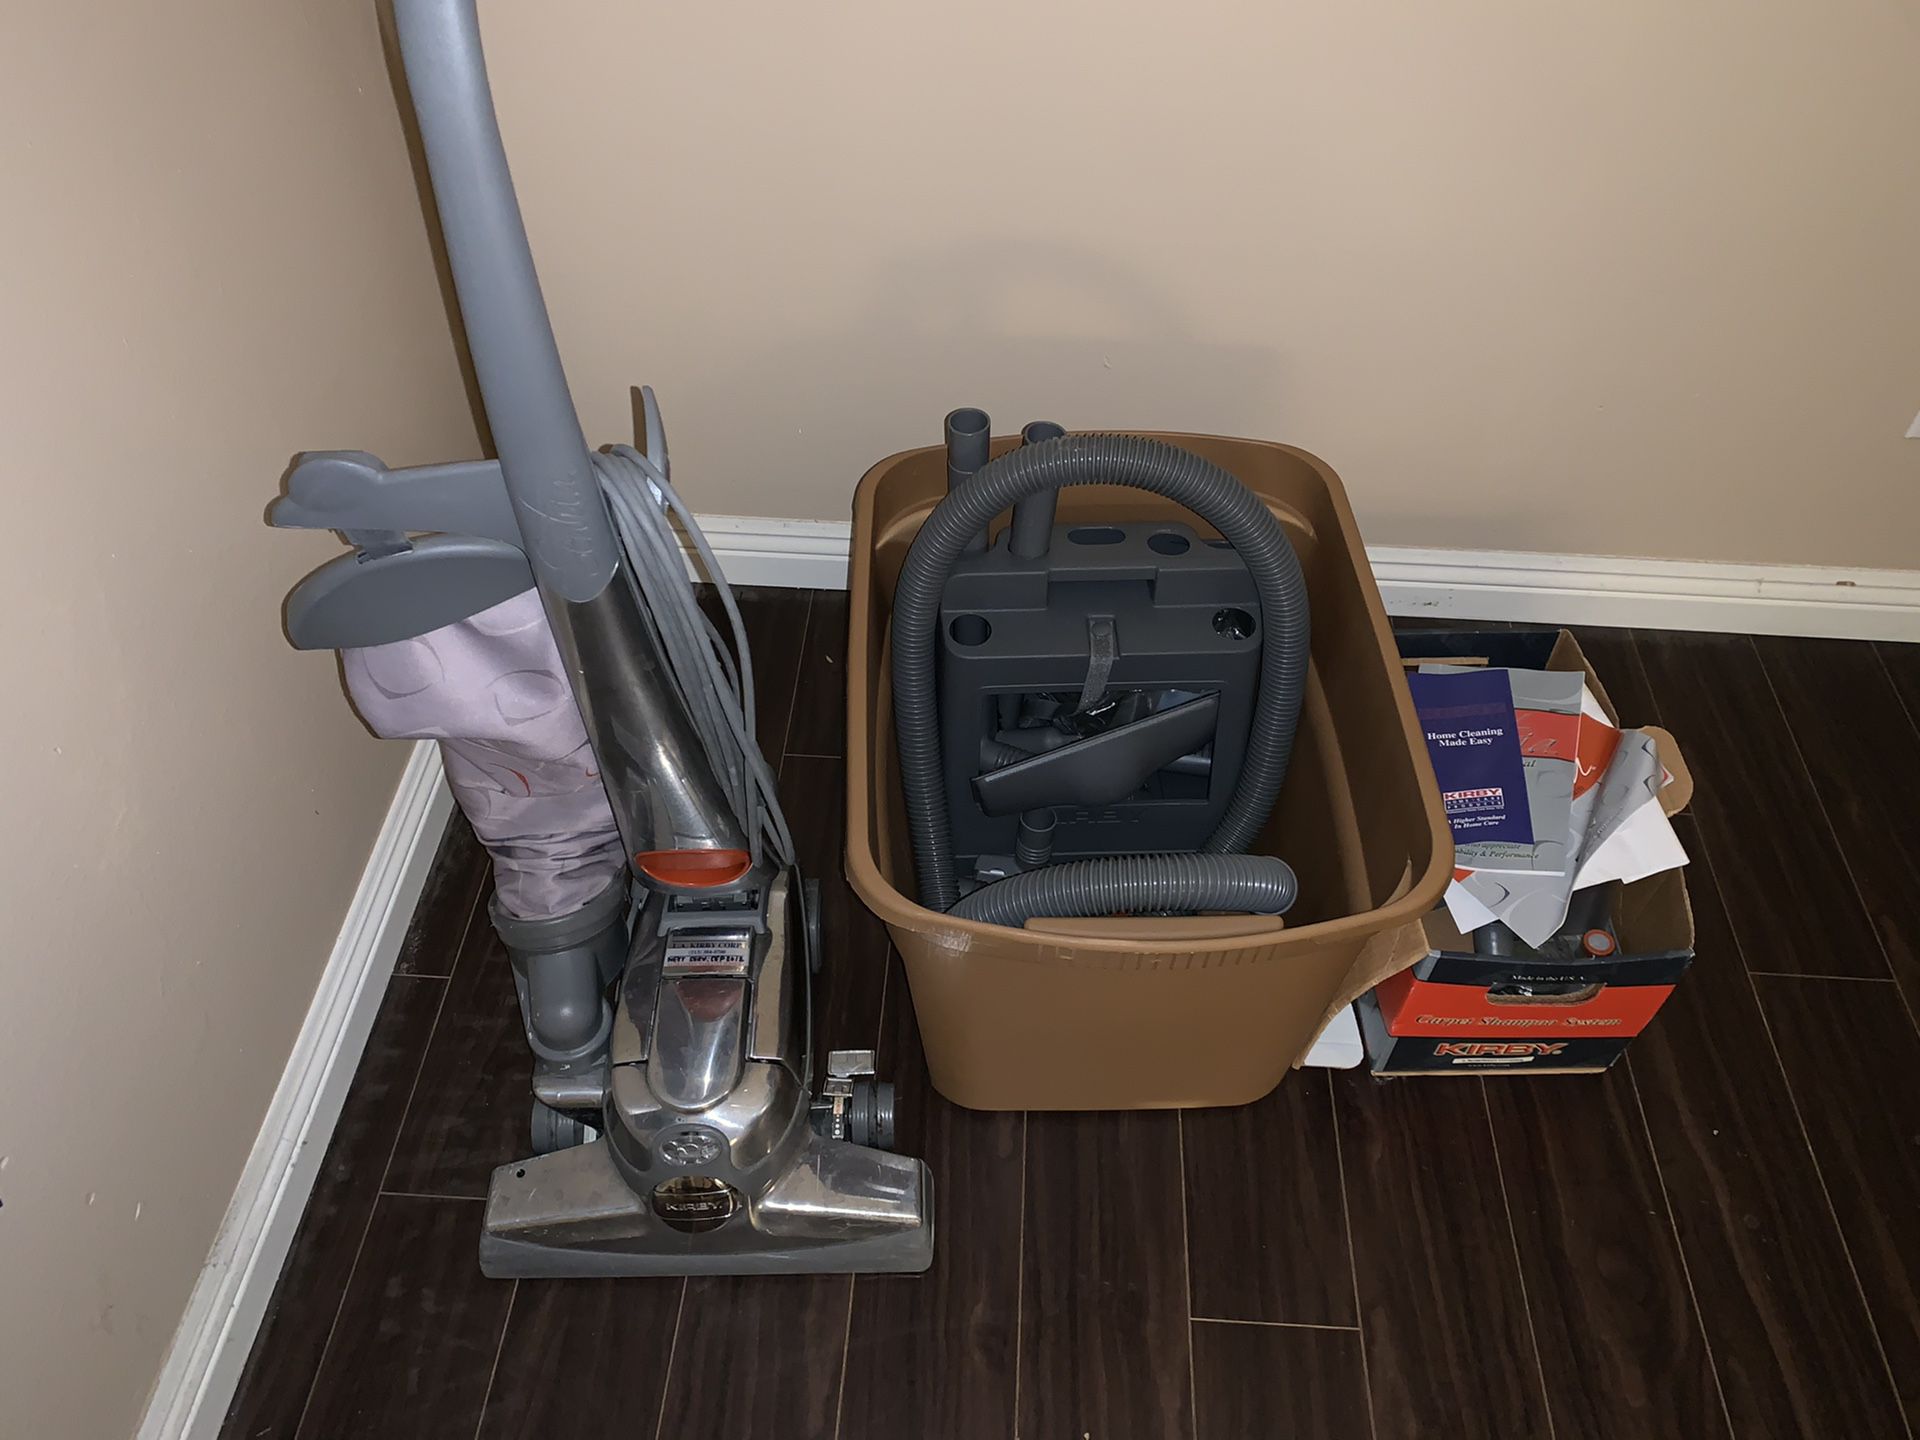 Kirby vacuum. Great condition. Full Maintenance record.